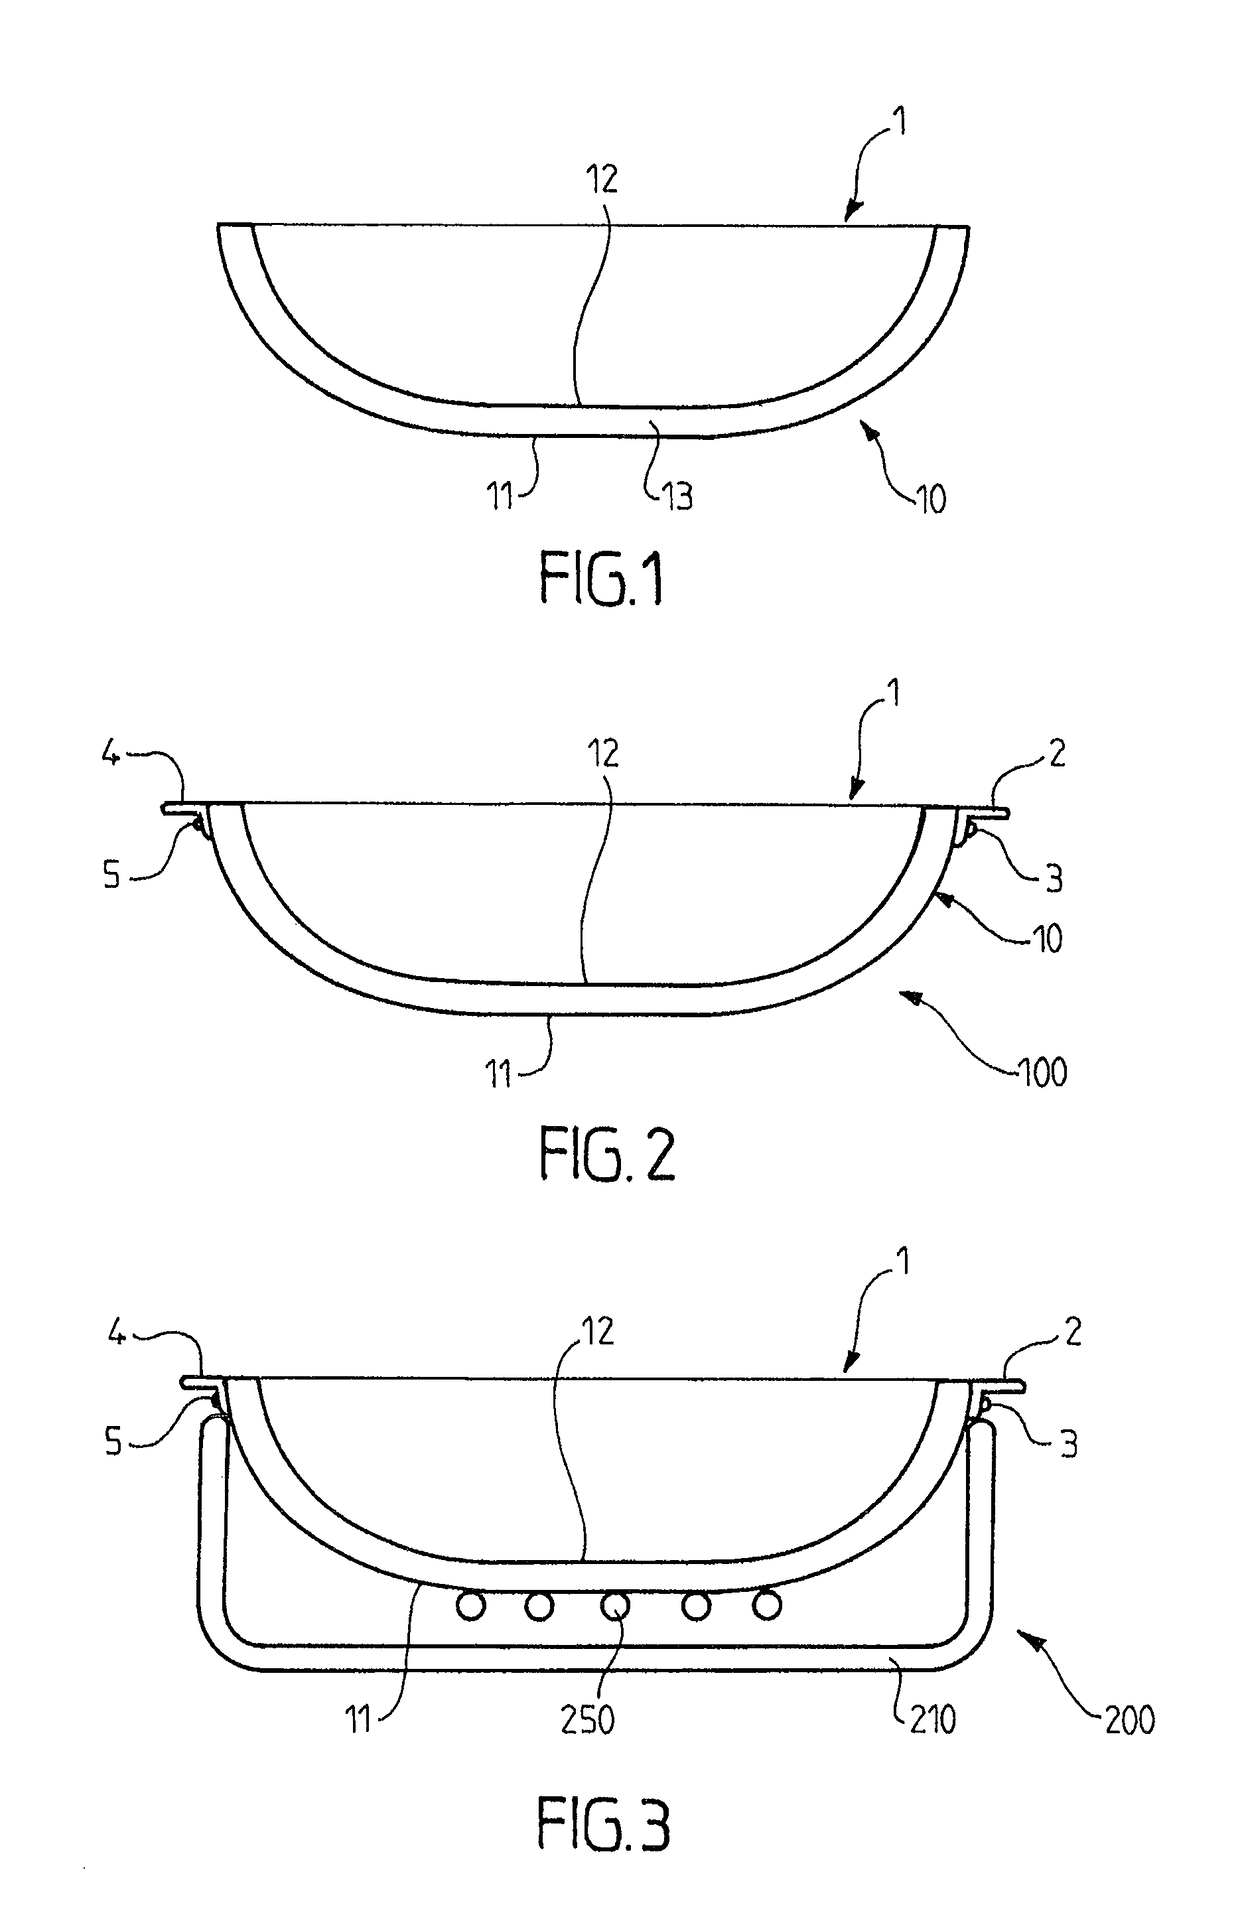 Method for obtaining a cooking vessel having a colored, hard, anodized outer surface